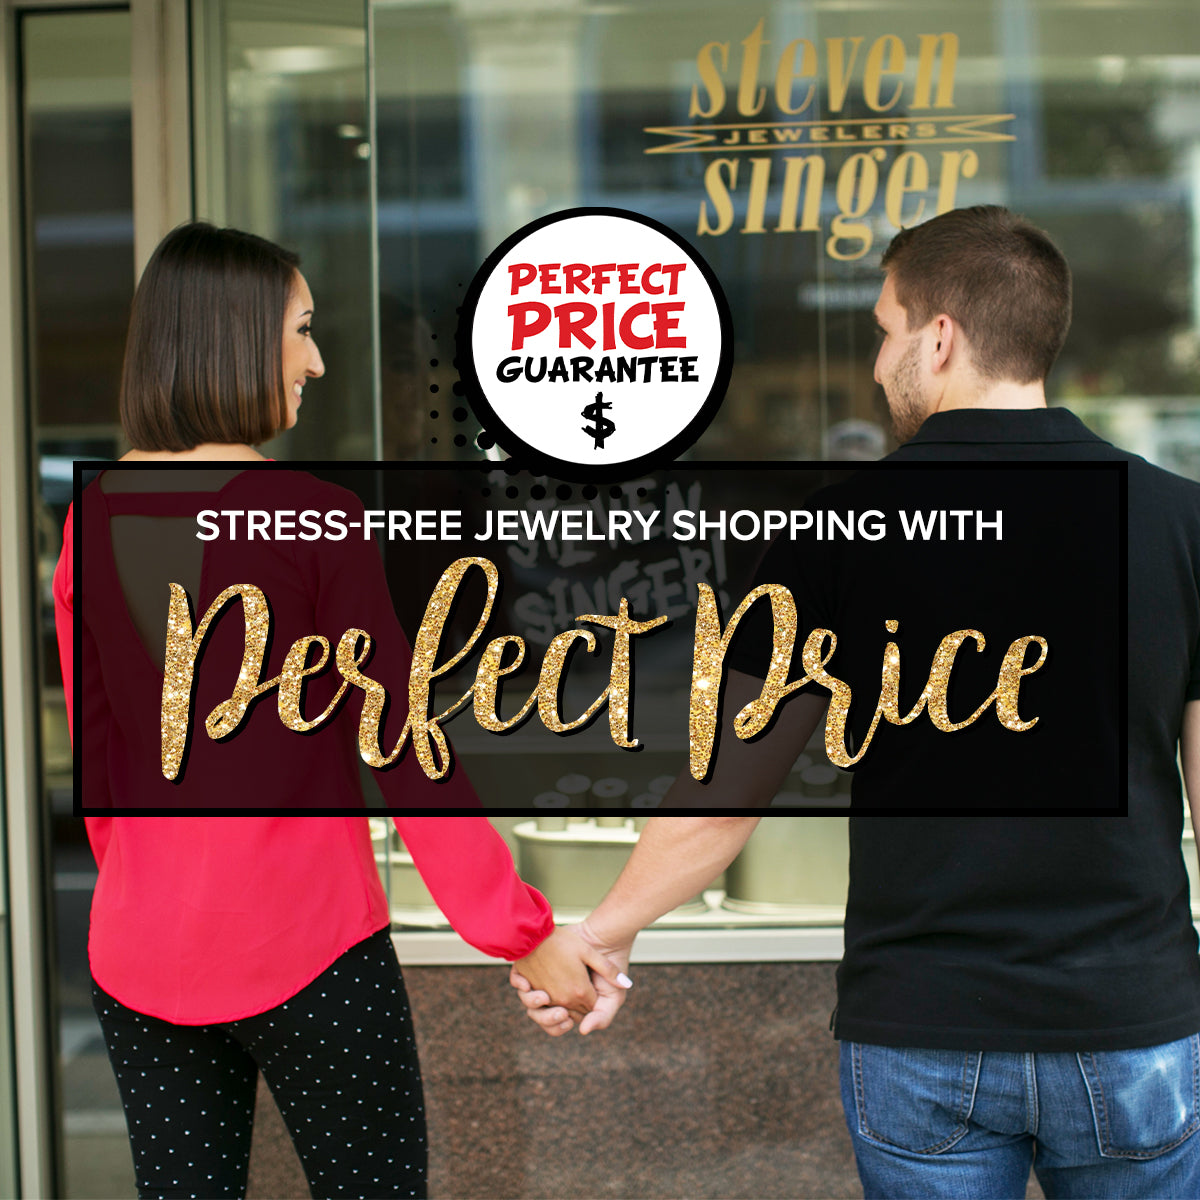 Steven Singer's Perfect Price: Your Stress-Free Jewelry Shopping Experience